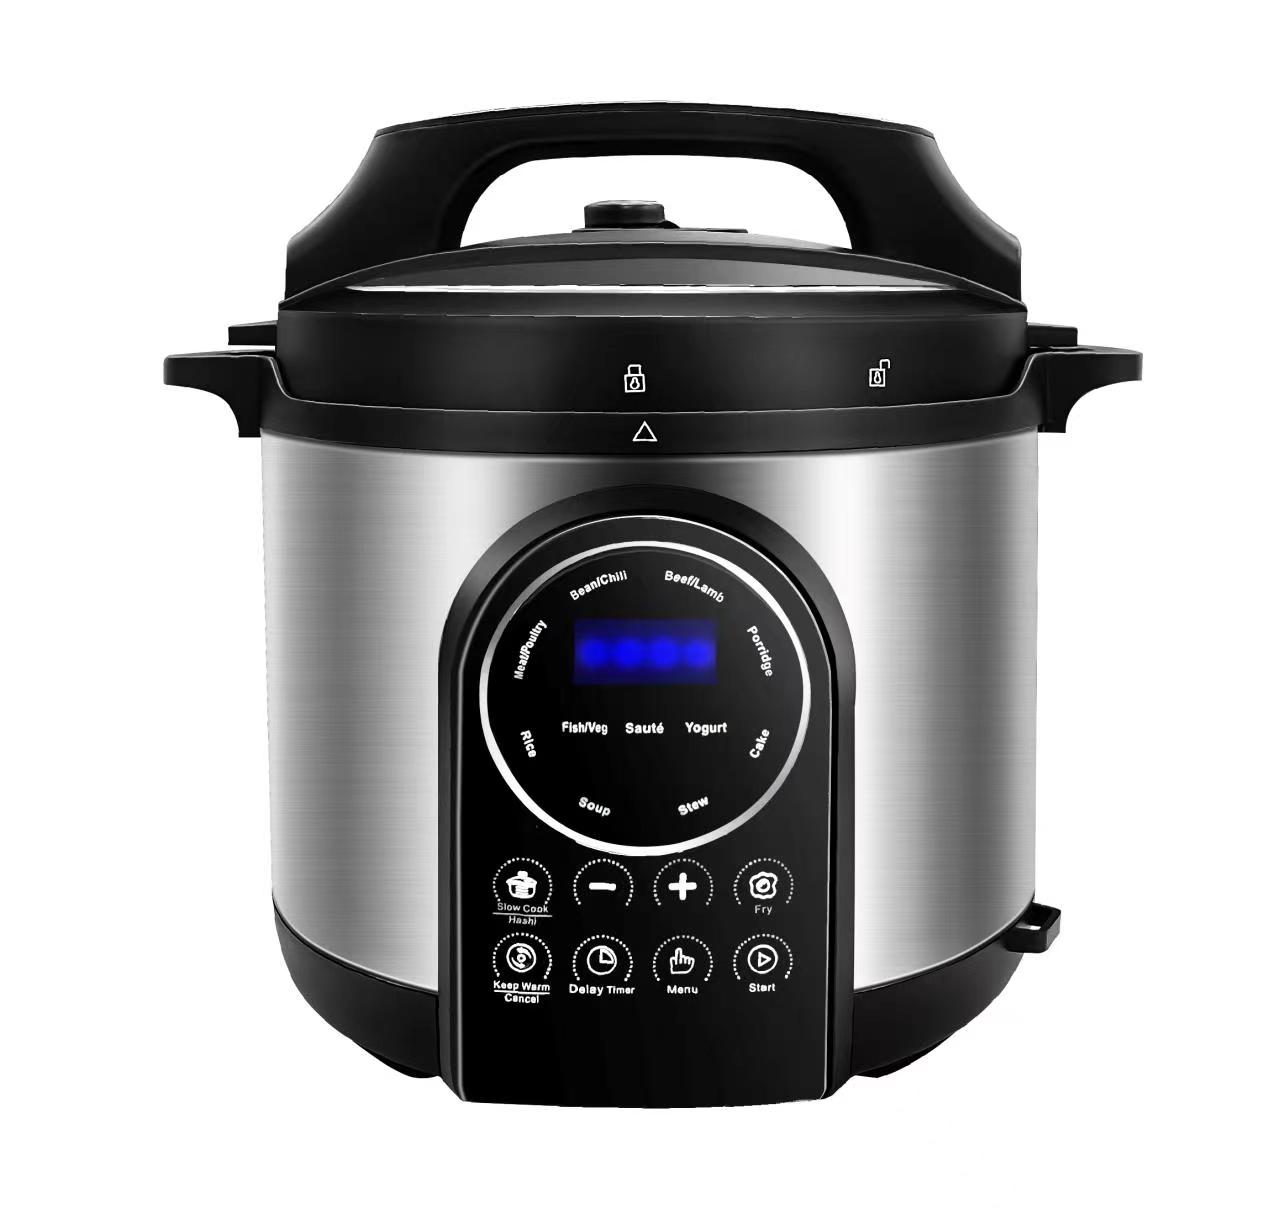 New design 15 function programs digital touch control panel smart pressure cooker